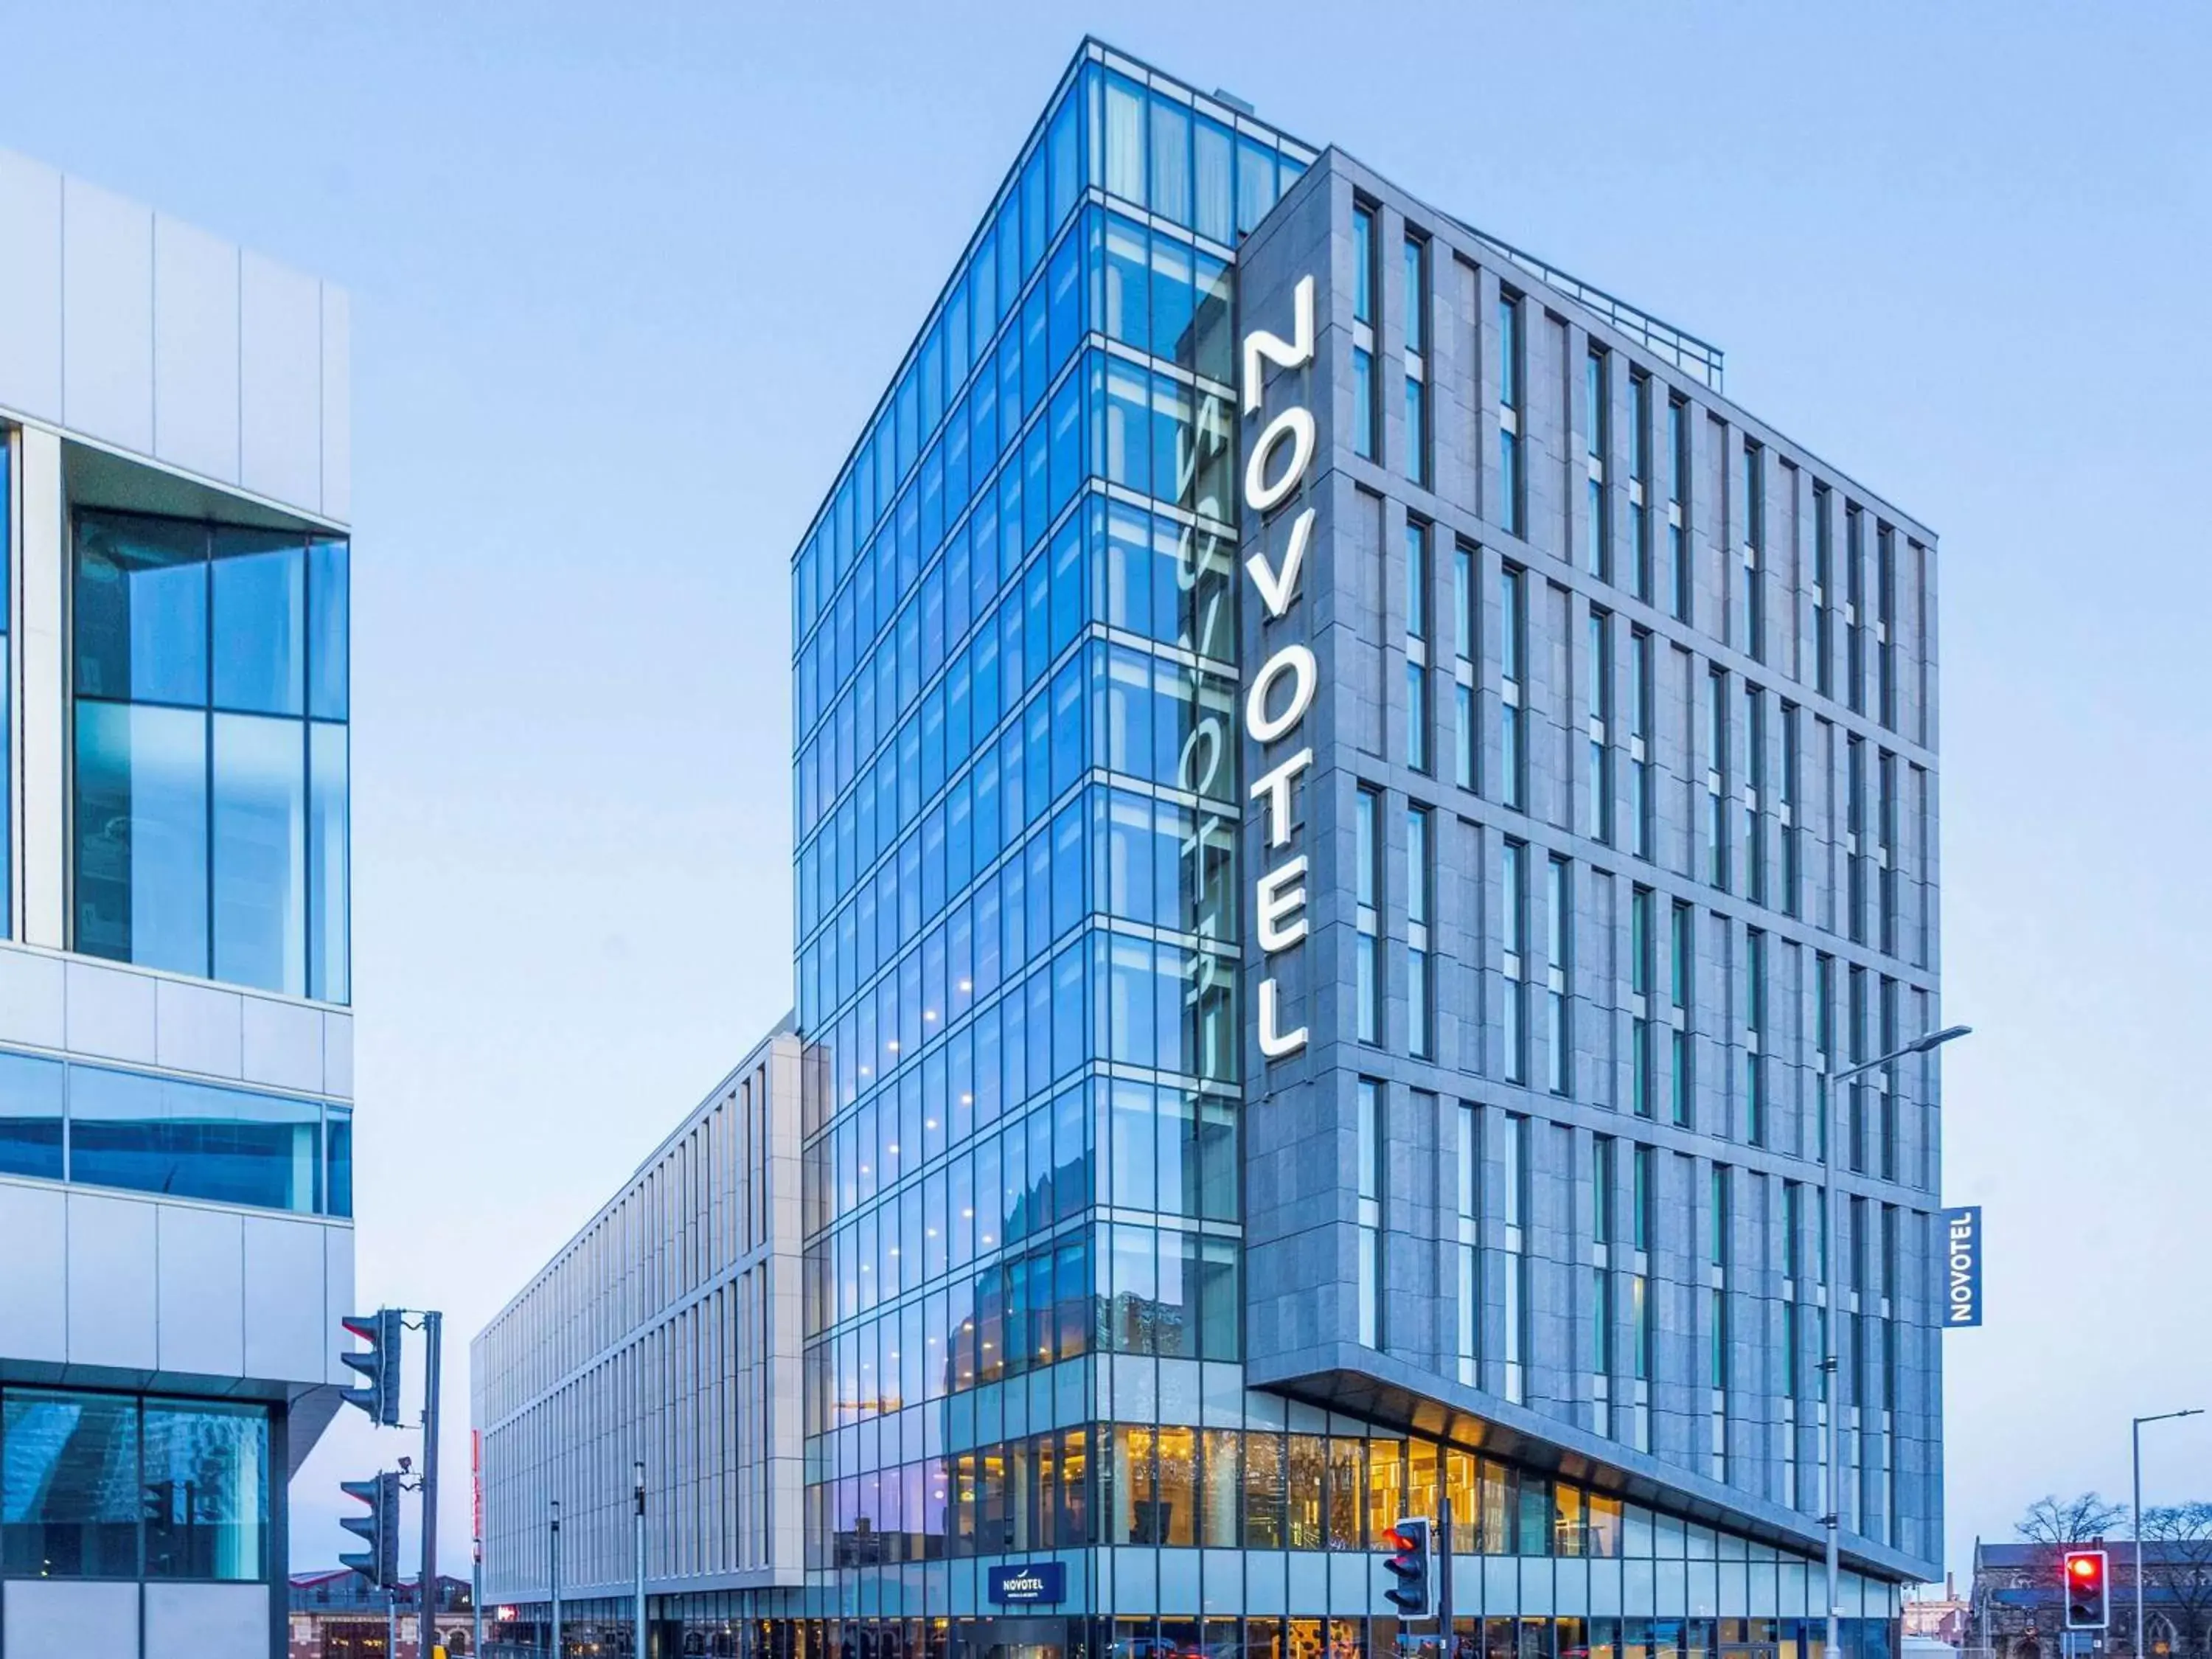 Property Building in Novotel Leicester